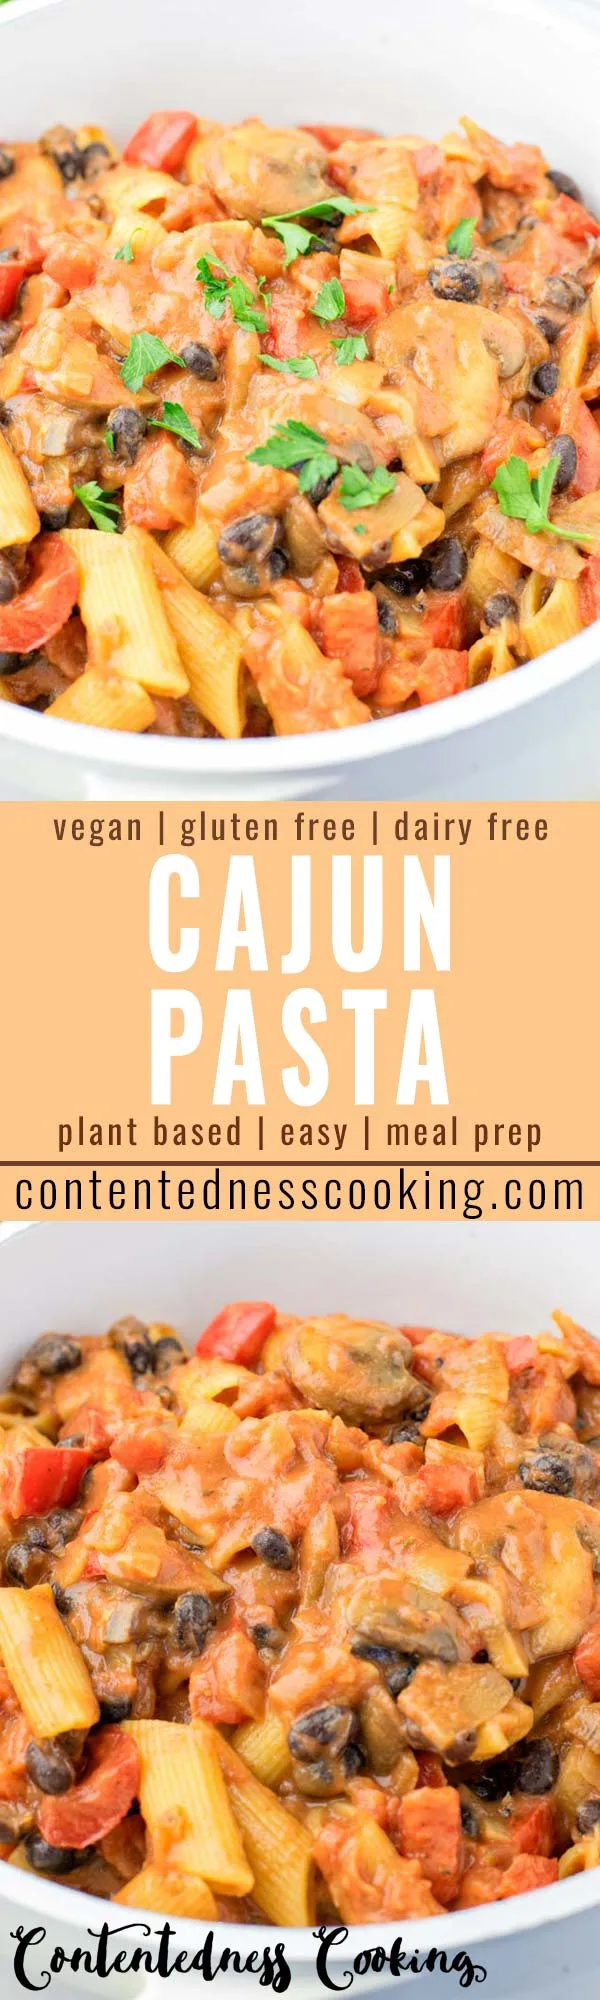 This Cajun Pasta is super easy to make and packed with such amazing flavors. No one would ever guess it is vegan and gluten free, too. Ready in under 30 minutes on the table, so amazing for dinner, lunch, meal prep that the whole family will love. #vegan #dairyfree #glutenfree #cajunpasta #30minutemeals #vegetarian #contentednesscooking #dinner #lunch #mealprep #comfortfood #familydinner 